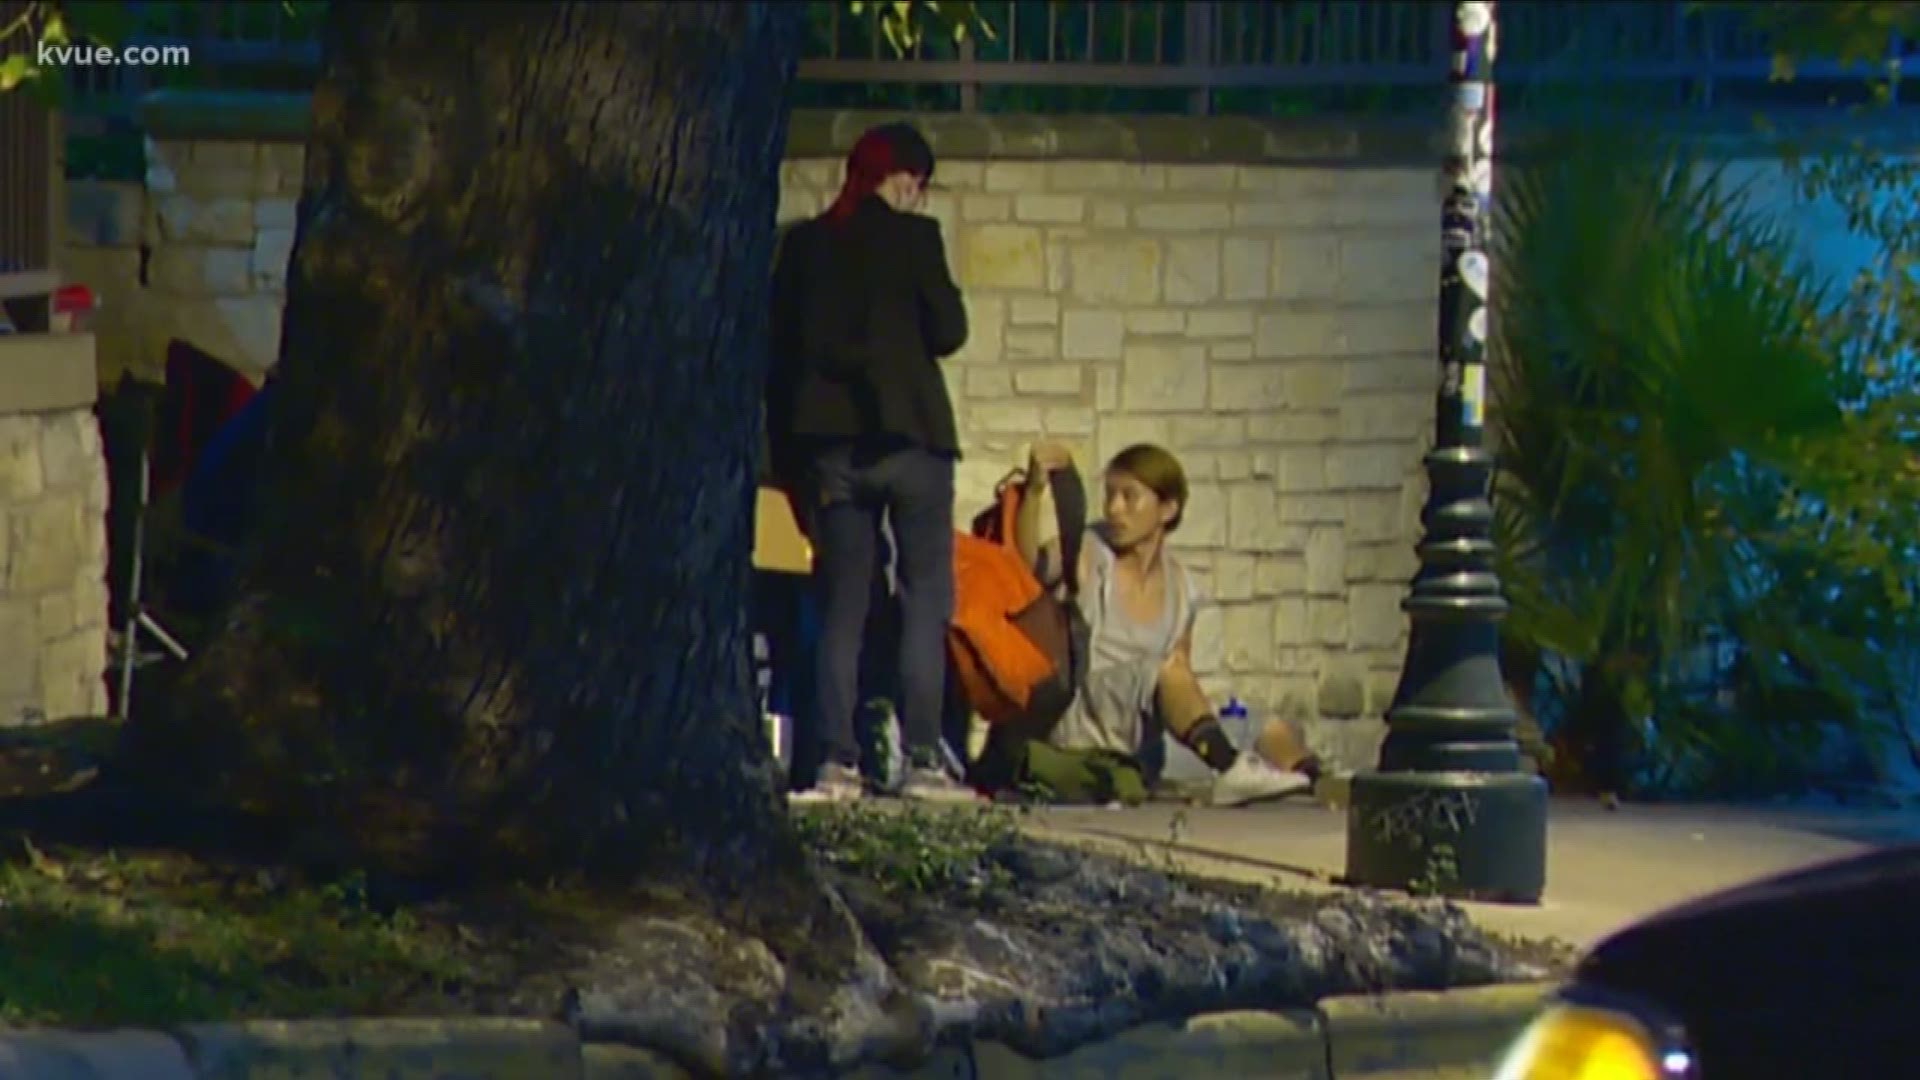 KVUE's Tori Larned shows us what the homeless go through during the night, sleeping on Austin's streets.